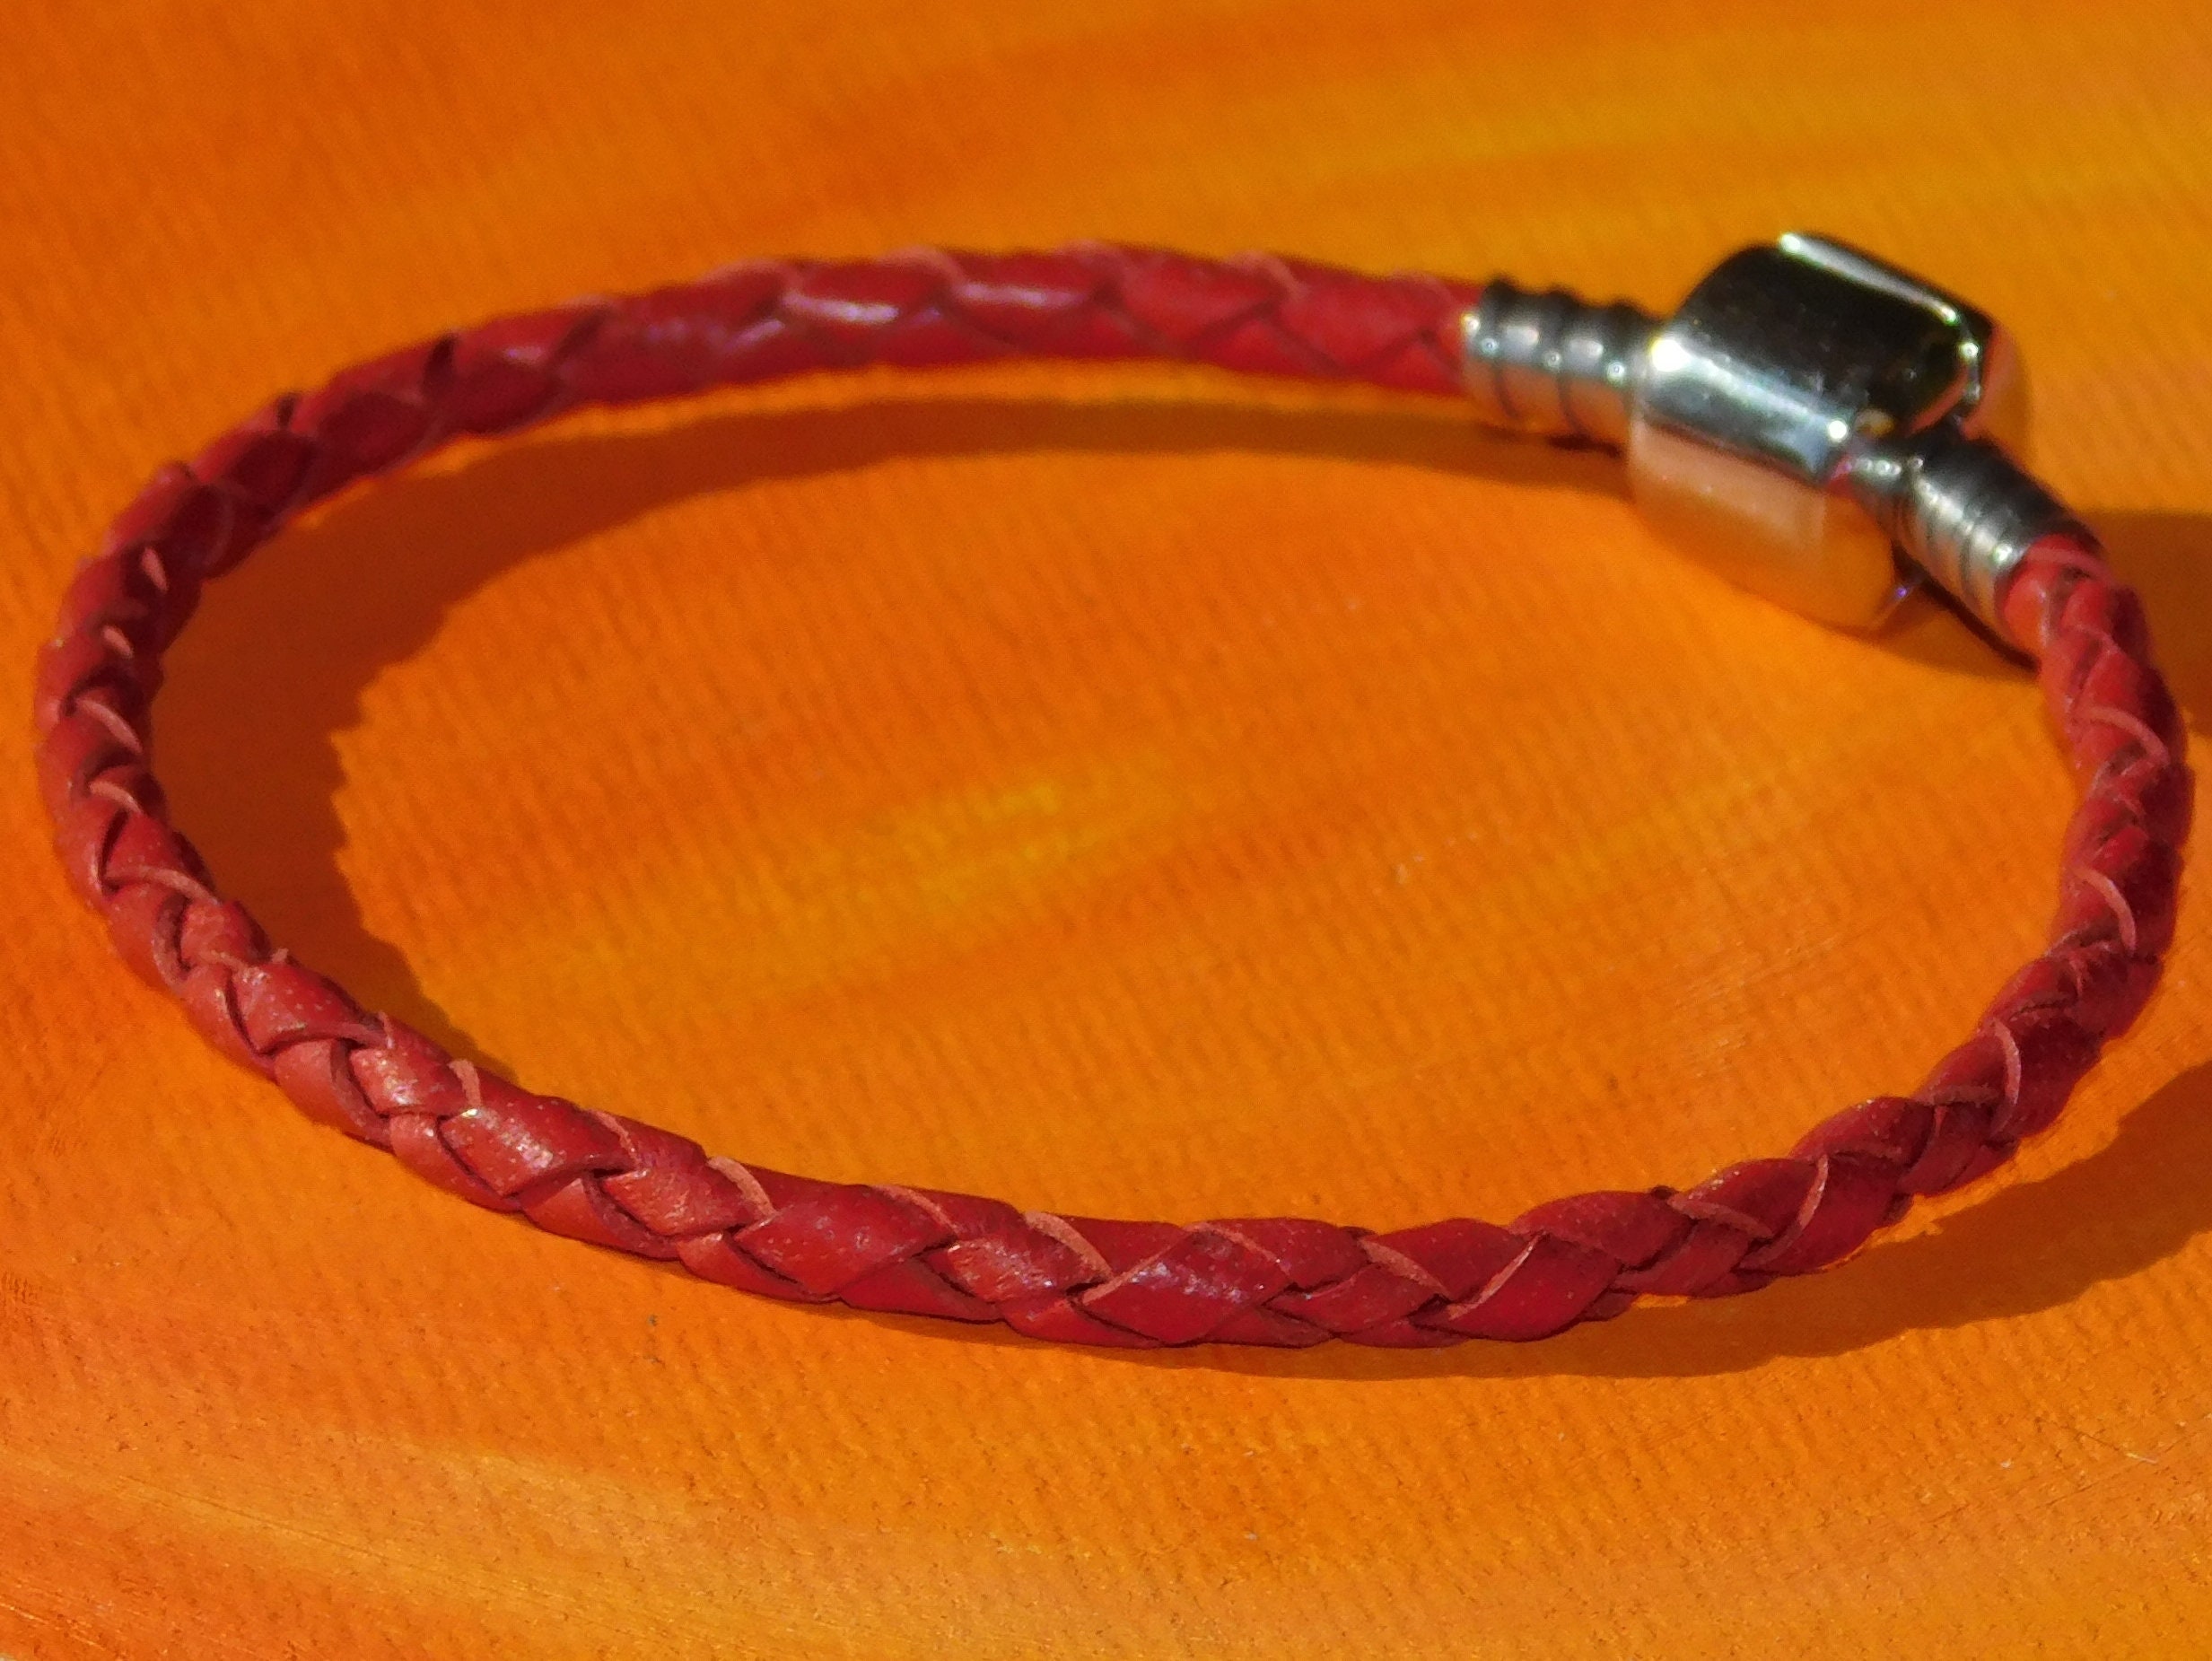 Ladies 3mm Red Braided leather & stainless steel European | Etsy